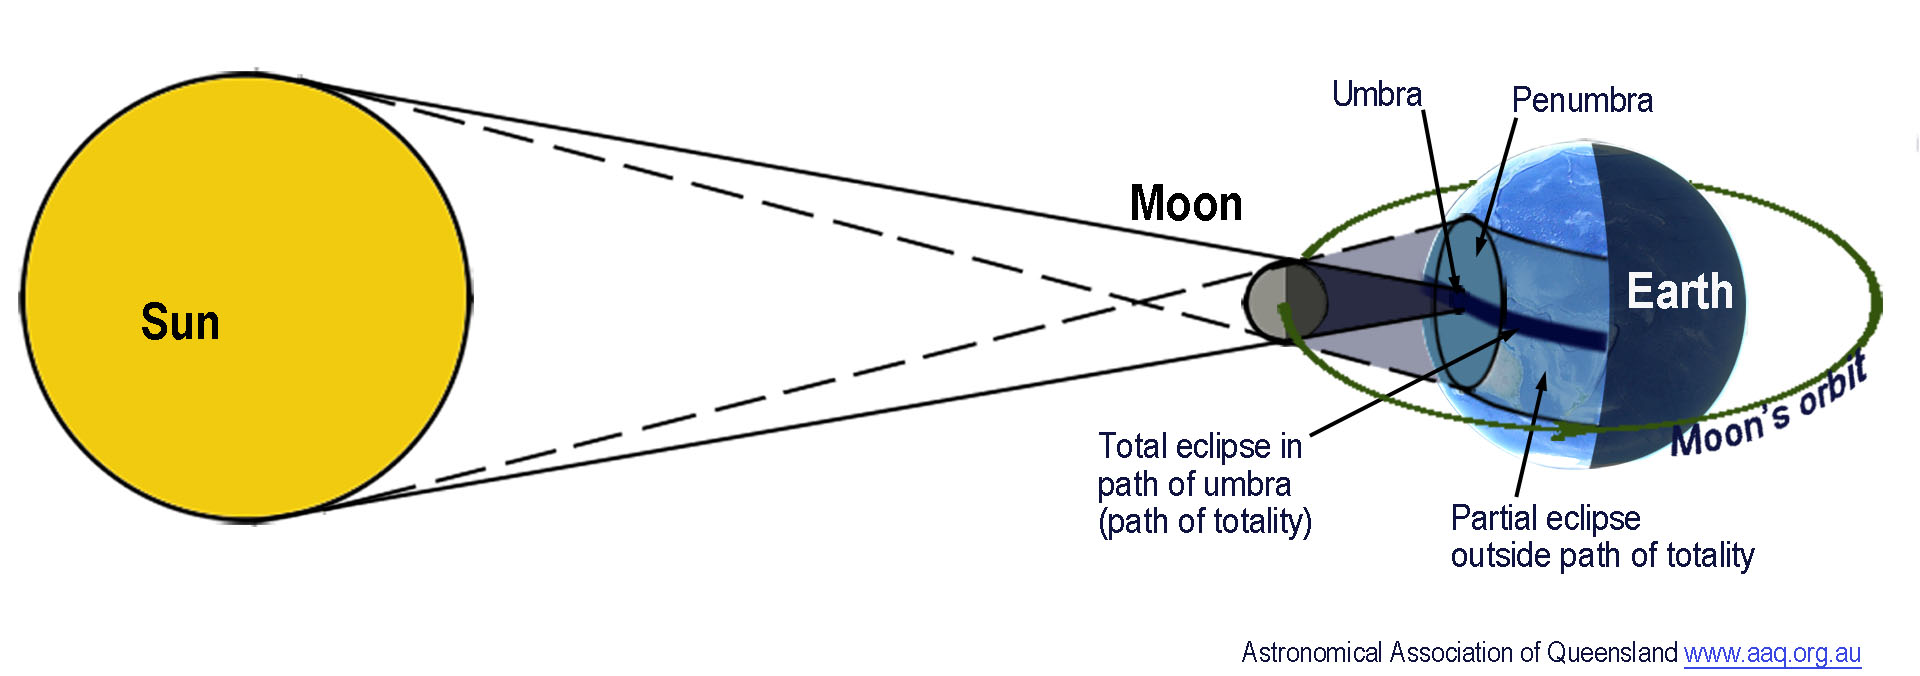 A diagram shows the Moon between the Sun and Earth with the Moon casting a shadow on Earth. The umbra, which is the central dark part of the Moon’s shadow is shown as a dark cone reaching Earth and indicating where the total solar eclipse occurs. A dark path is shown around Earth labelled as the path of totality where the total eclipse moves around Earth as the Moon orbits Earth. The Moon’s penumbra which is the Moon’s lighter outer shadow is shown on Earth surrounding the umbra and this is displayed moving around Earth indicating where a partial solar eclipse occurs on either side of the path of totality.